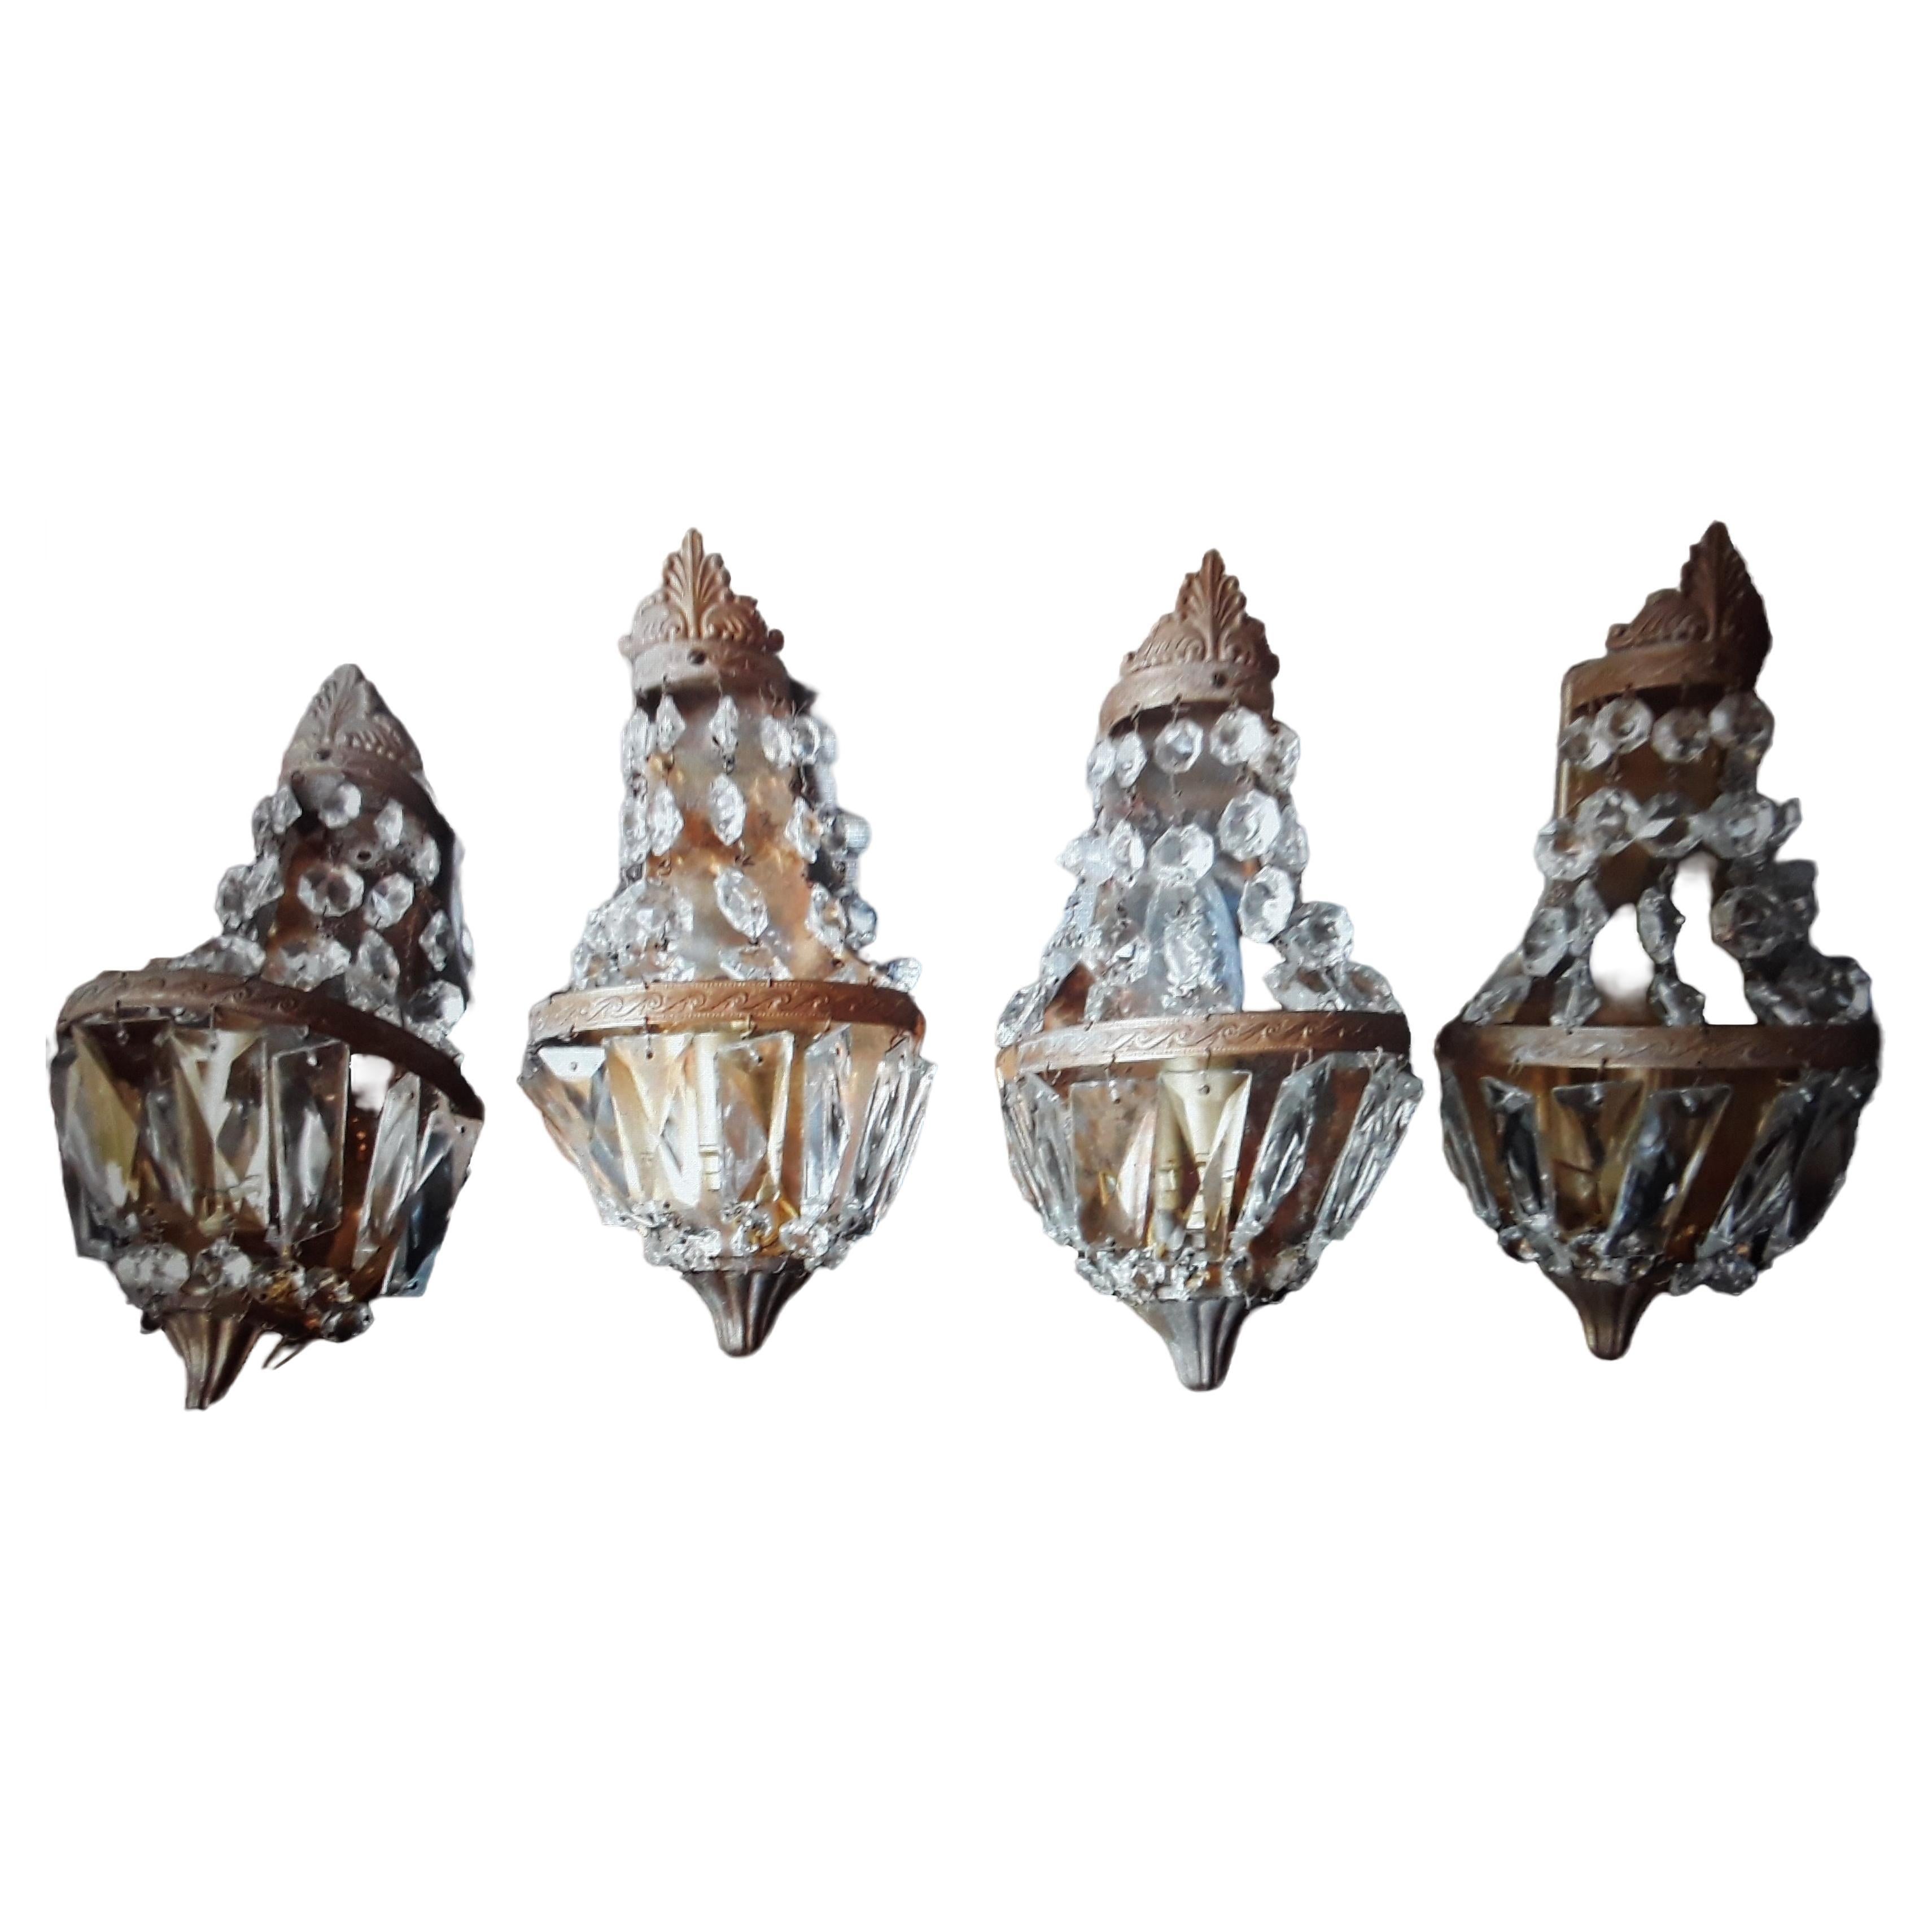 Set of 4 c1920's French Louis XVI style Bronze w/ Cascading Crystal Wall Sconces For Sale